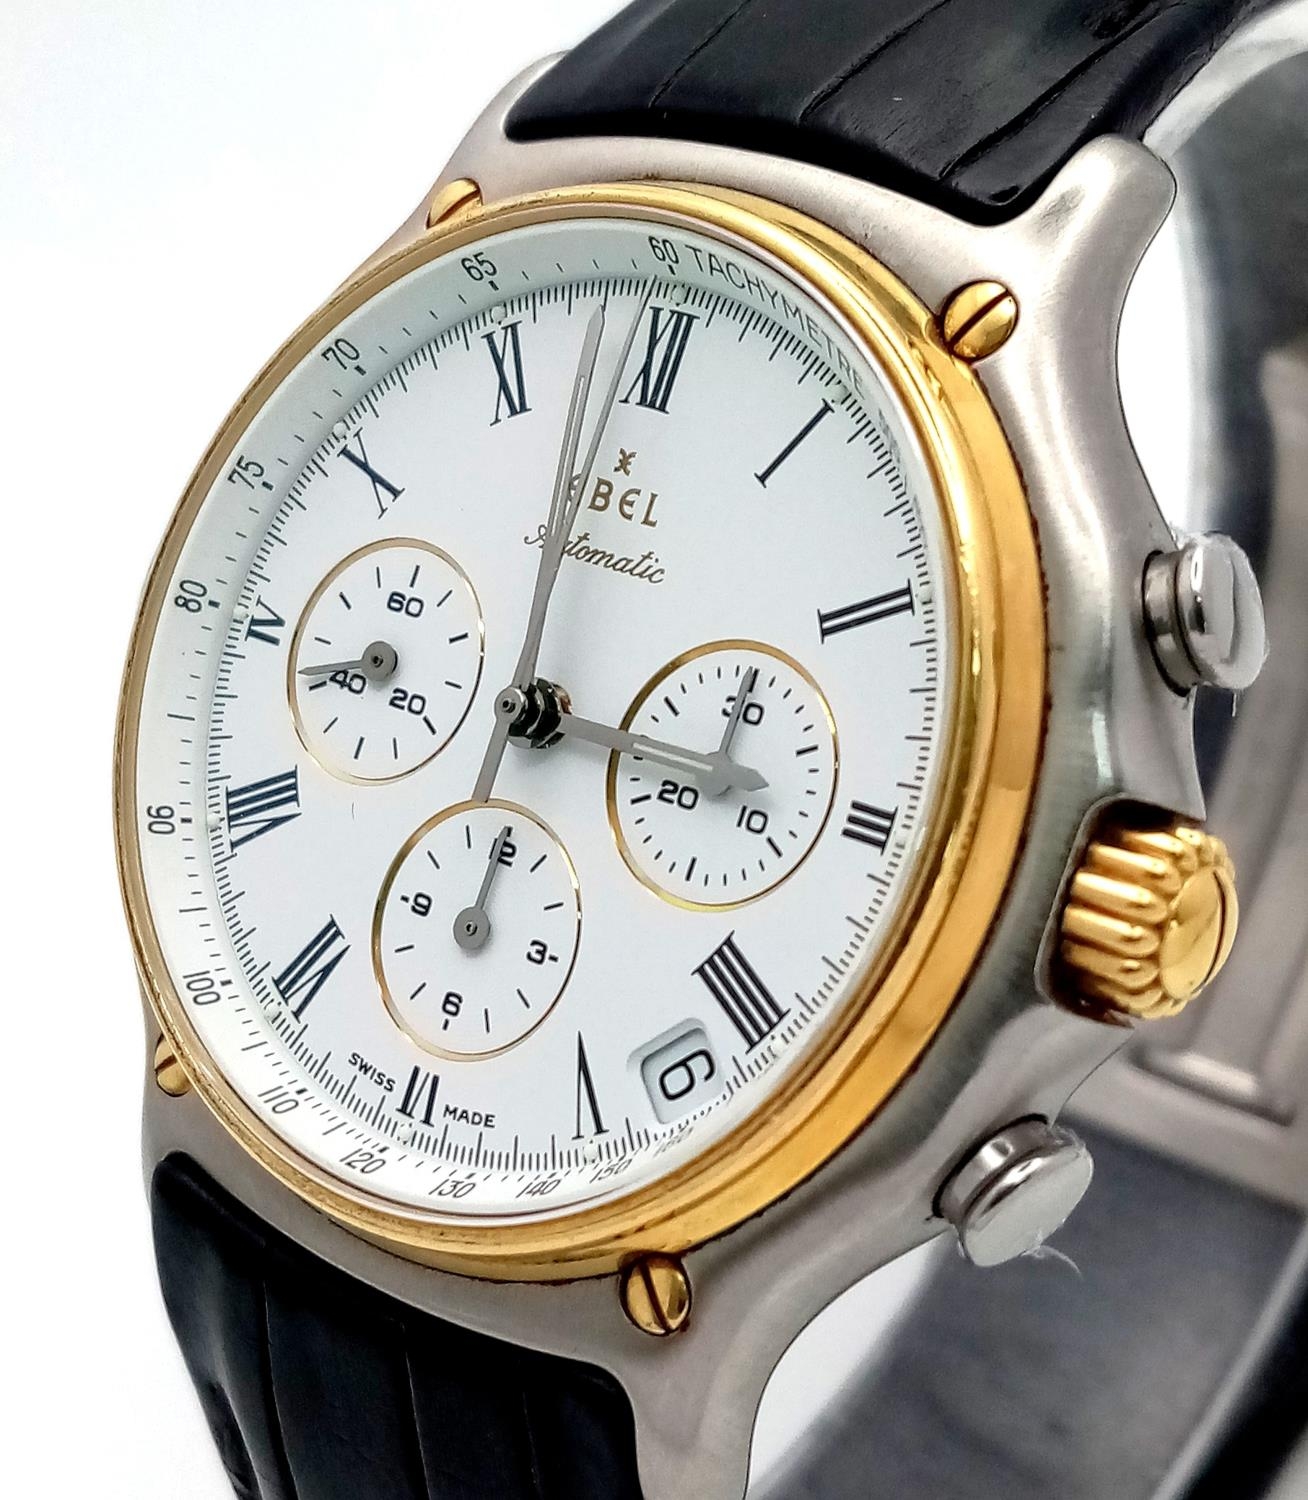 An Ebel Automatic Chronograph Gents Watch. Black leather strap. Two tone case - 38mm. White dial - Image 2 of 8